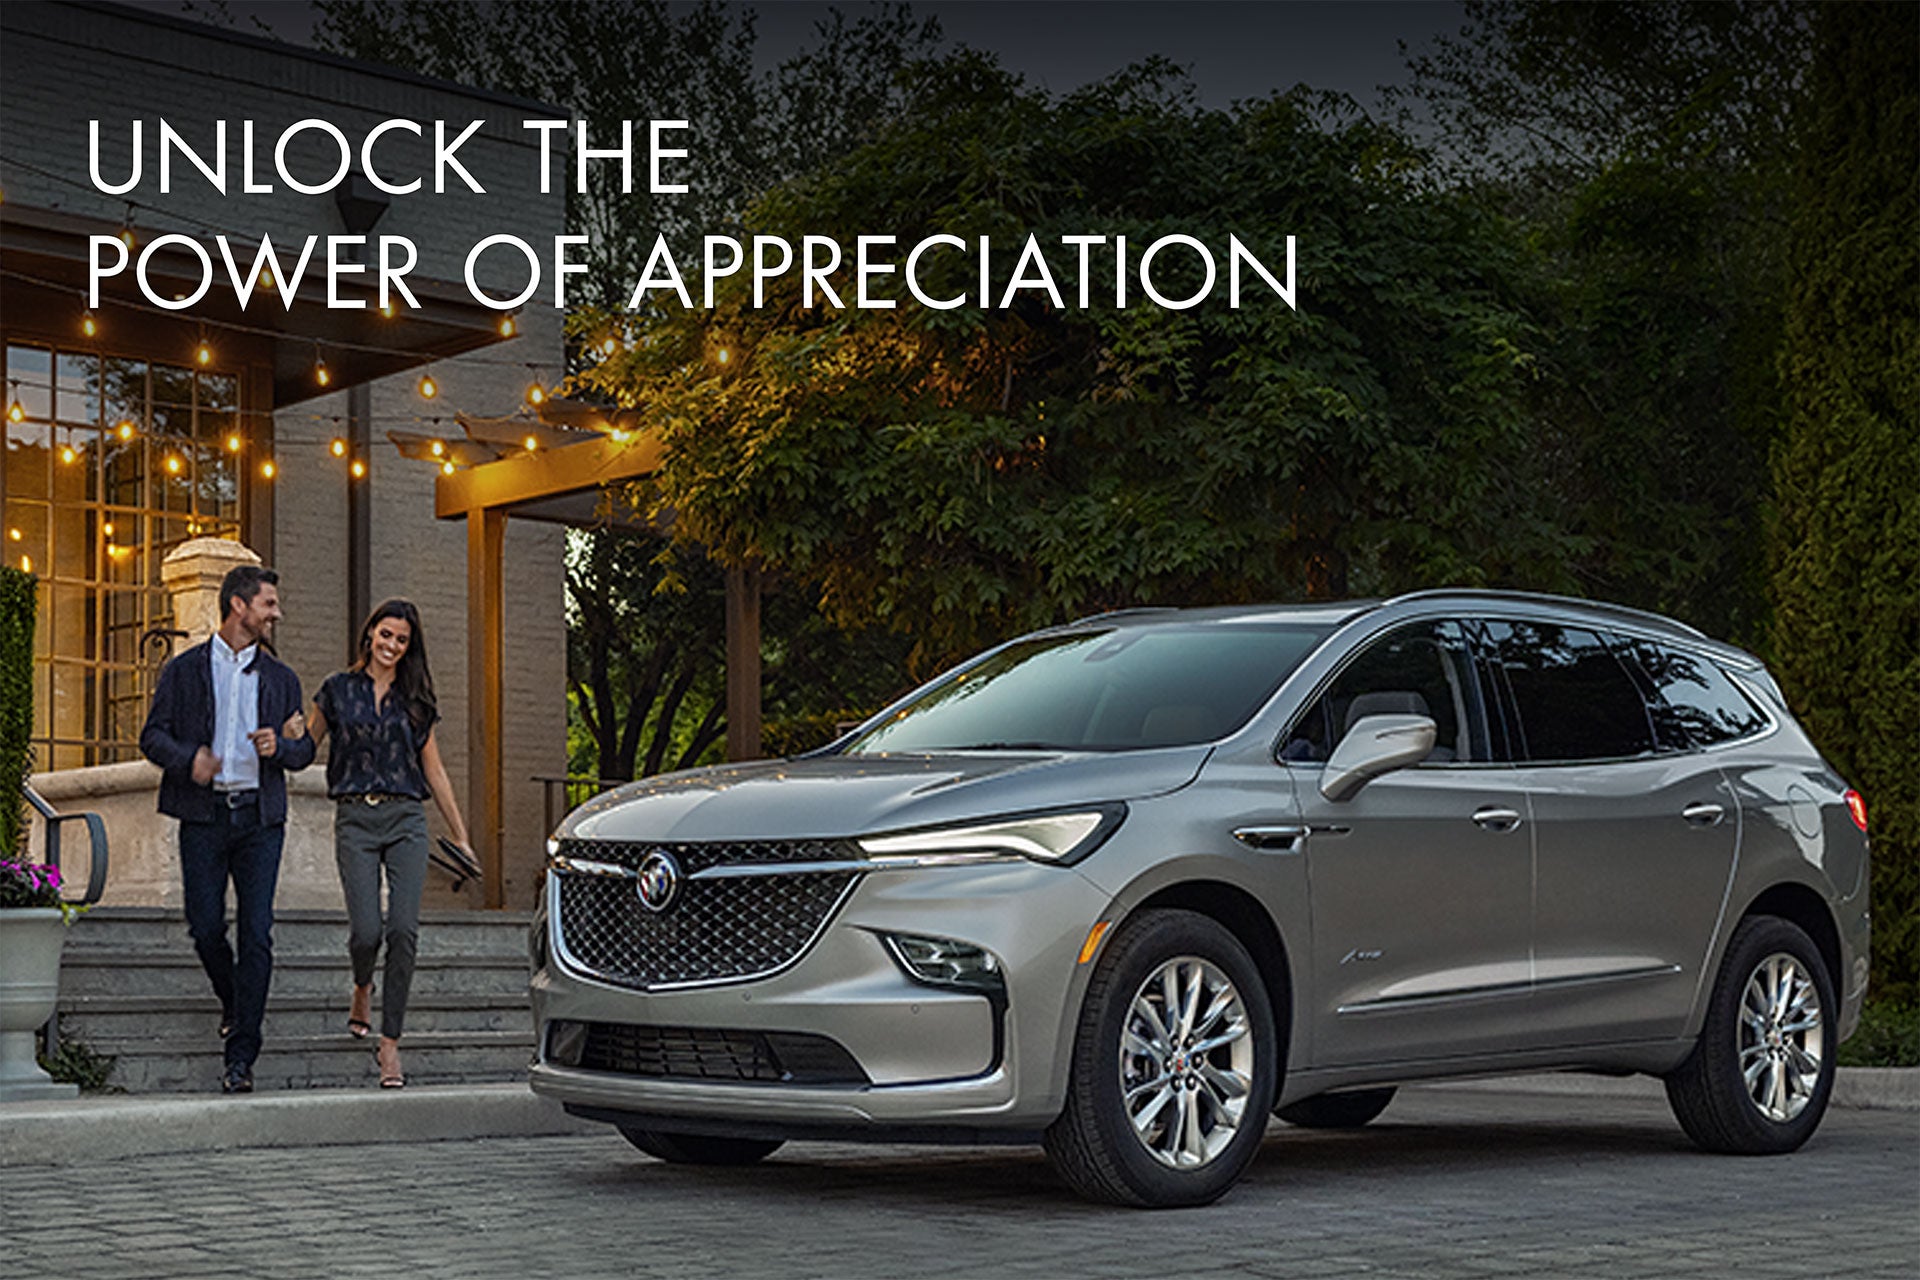 Unlock the power of appreciation | Sommer's Buick GMC in Mequon WI